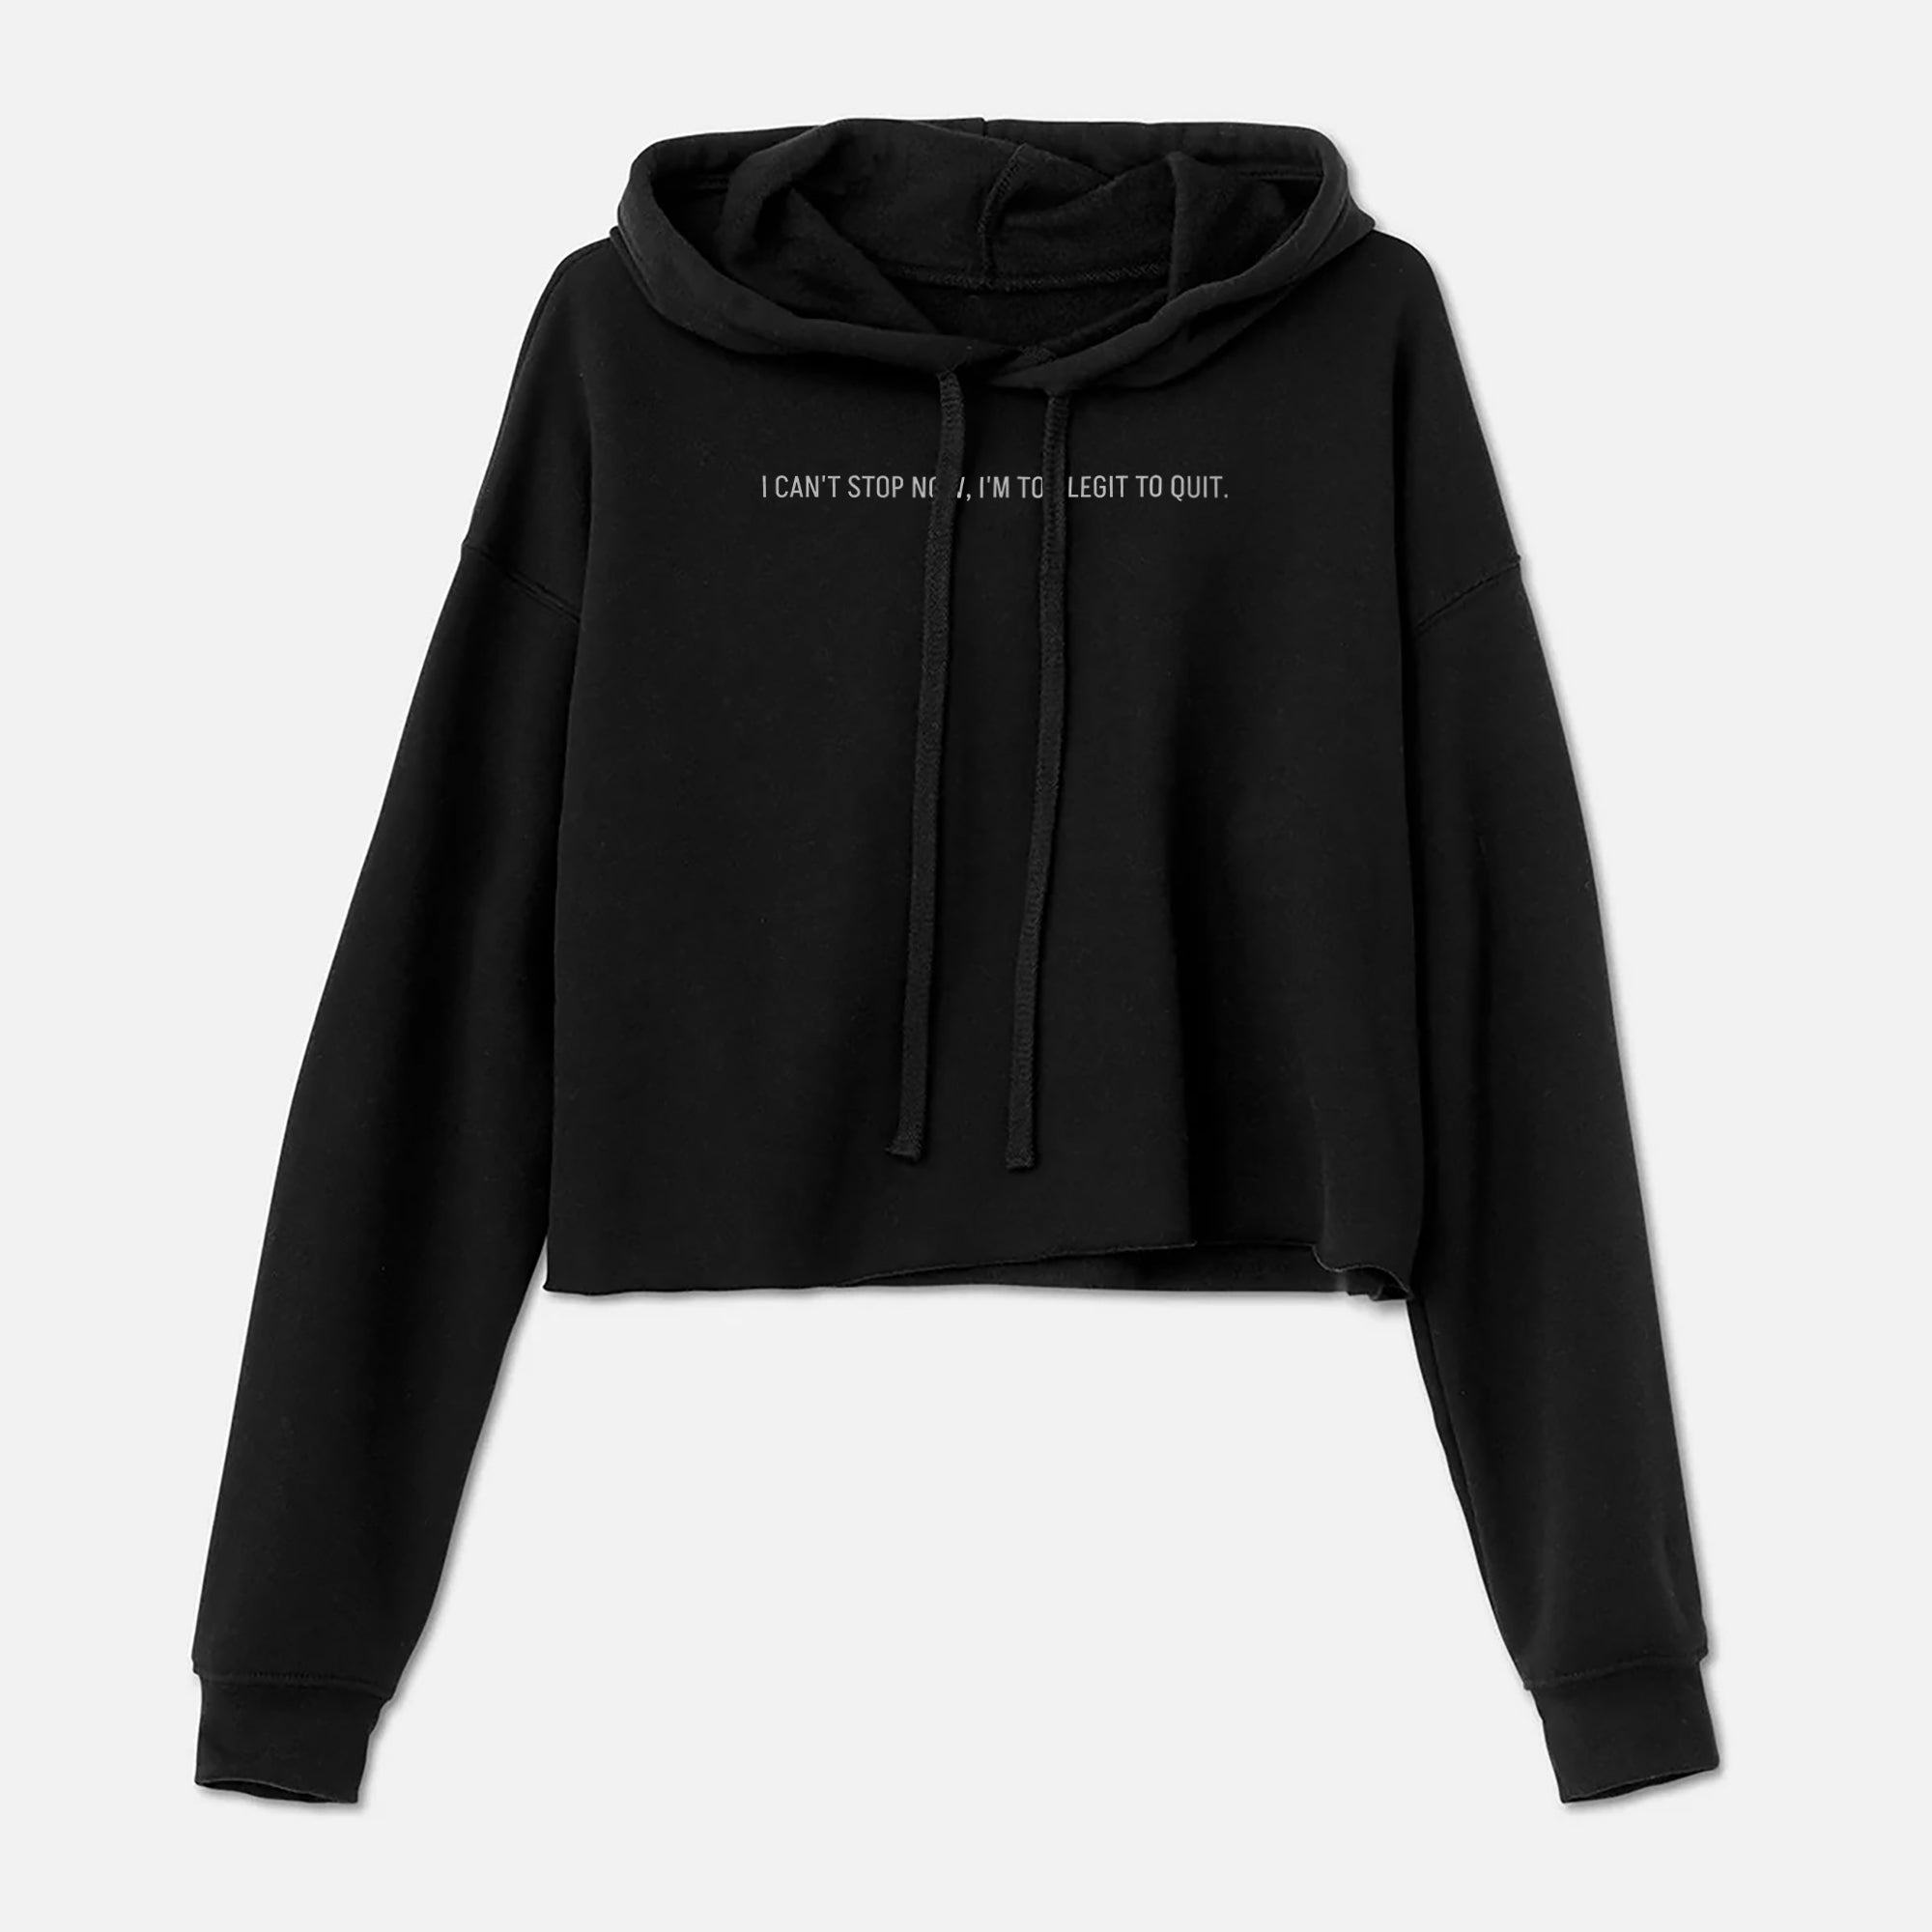 Can't Stop Now, Too Legit to Quit Cropped Hoodie Solid Black Model Image